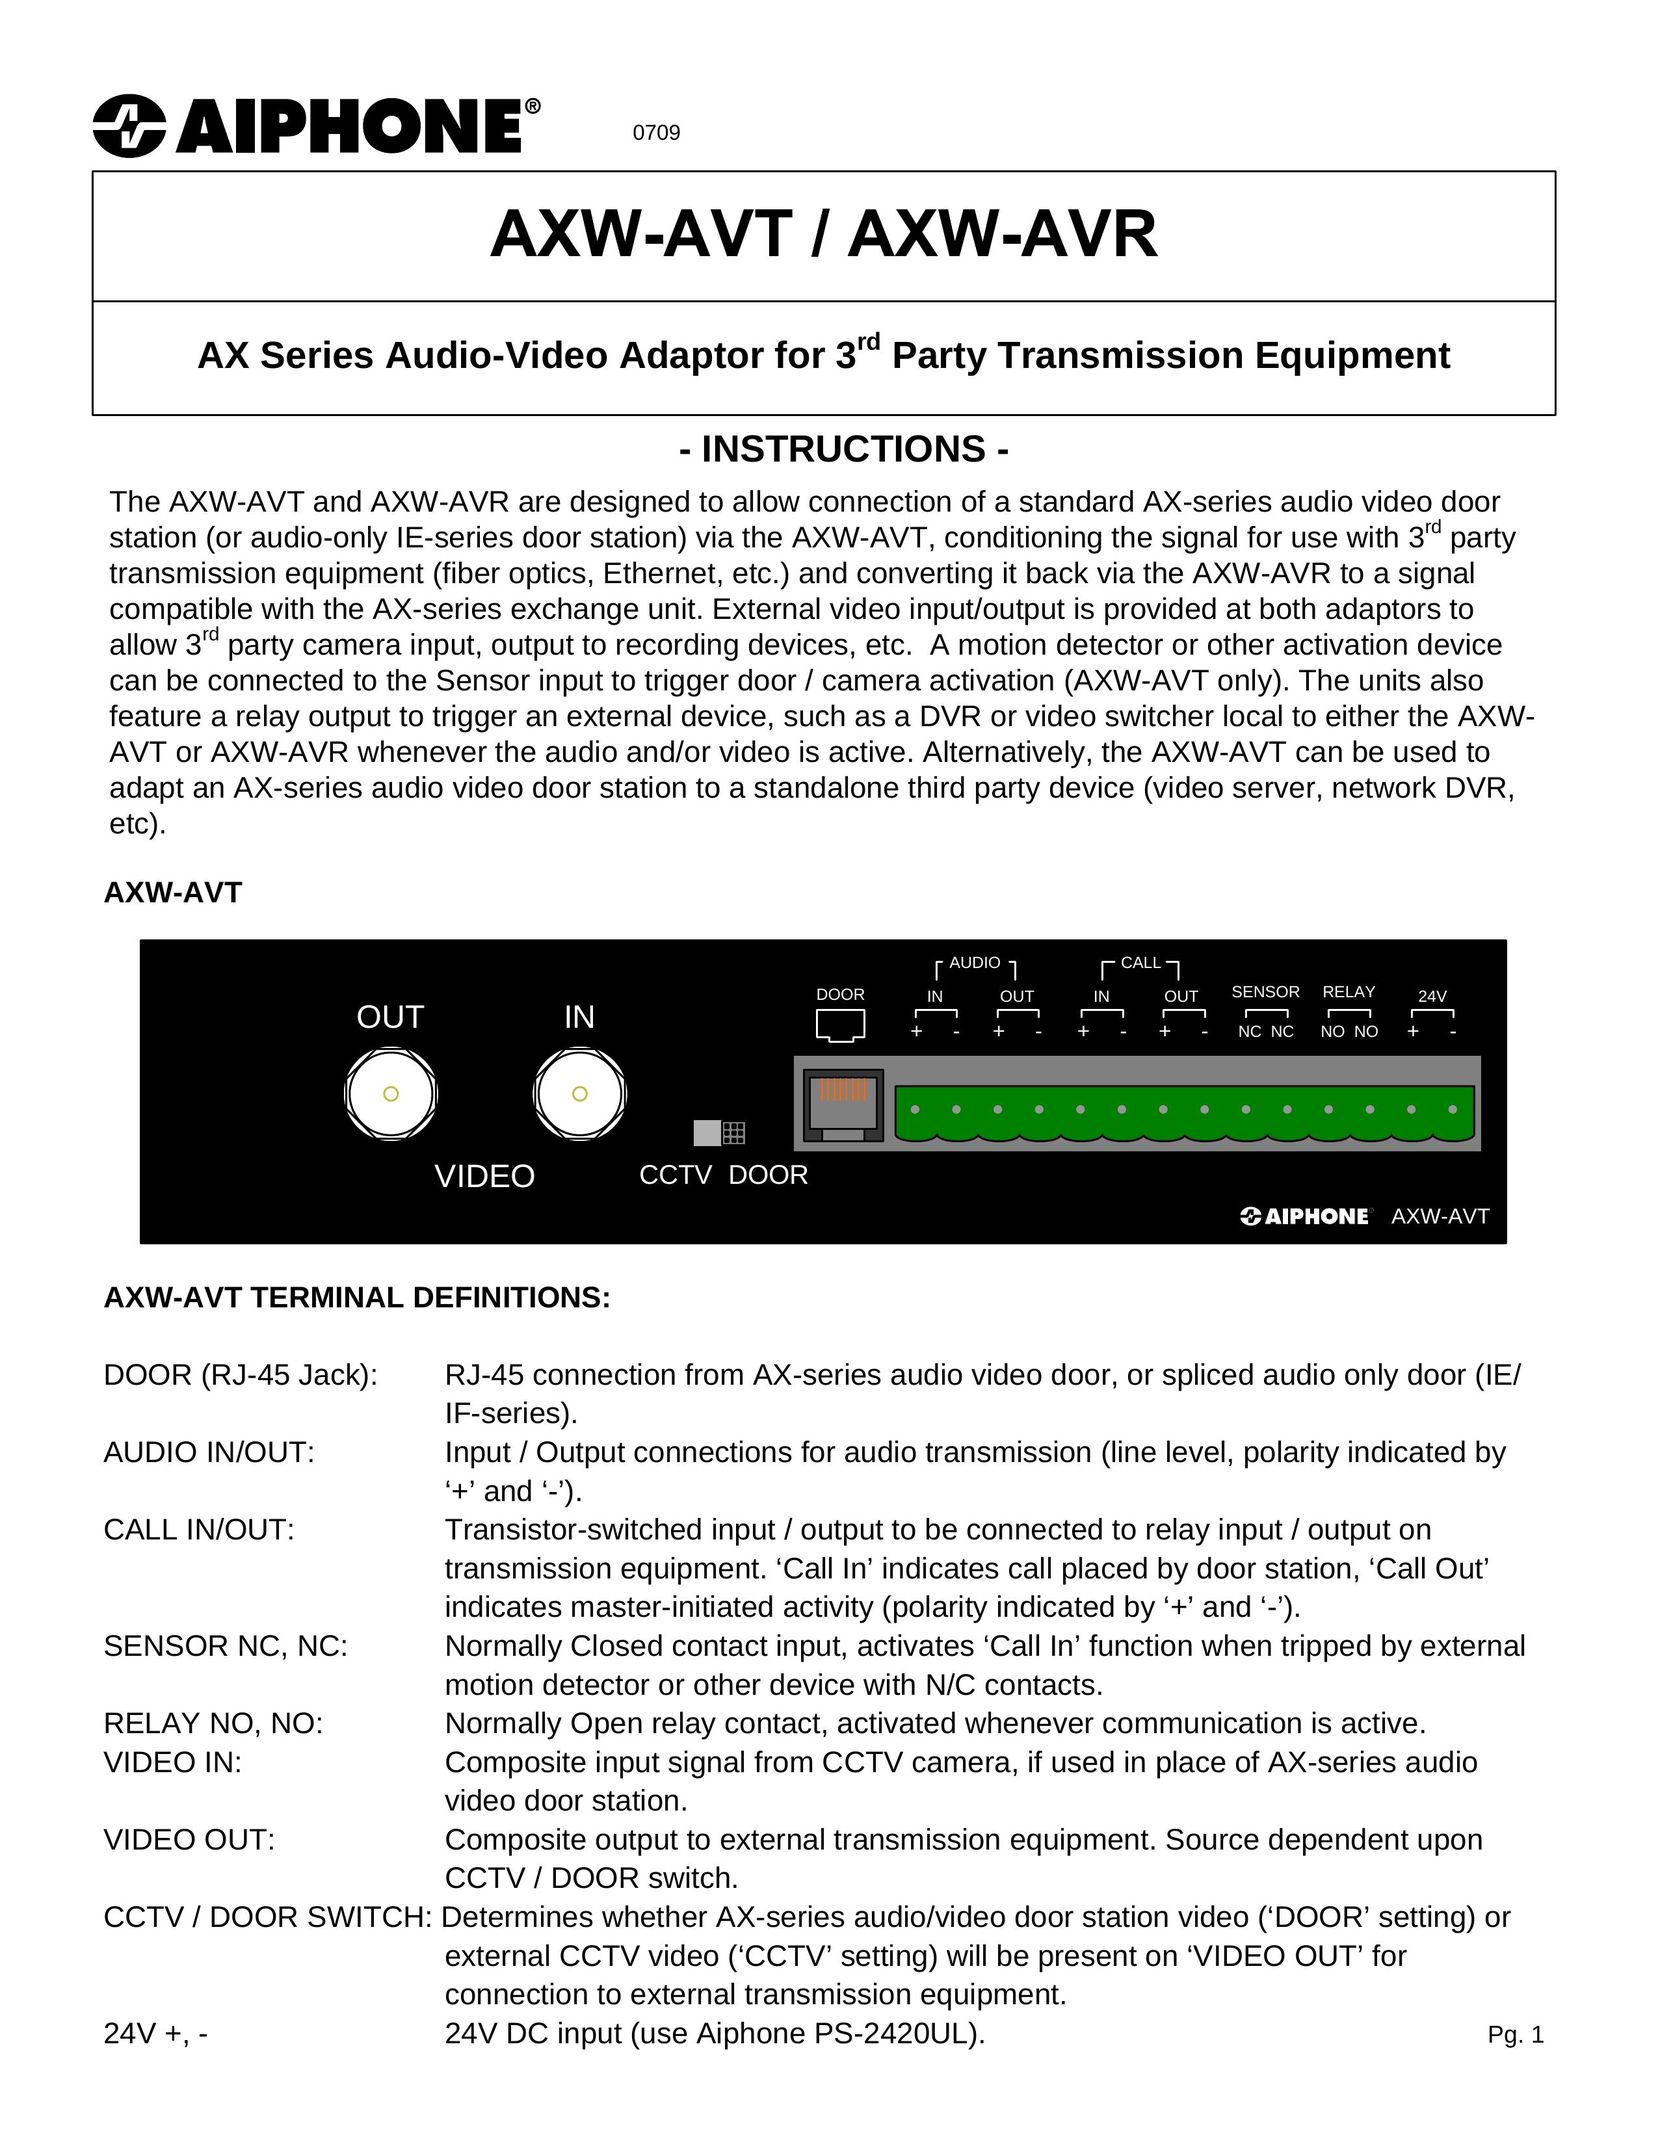 Aiphone AXW-AVR Stereo Receiver User Manual